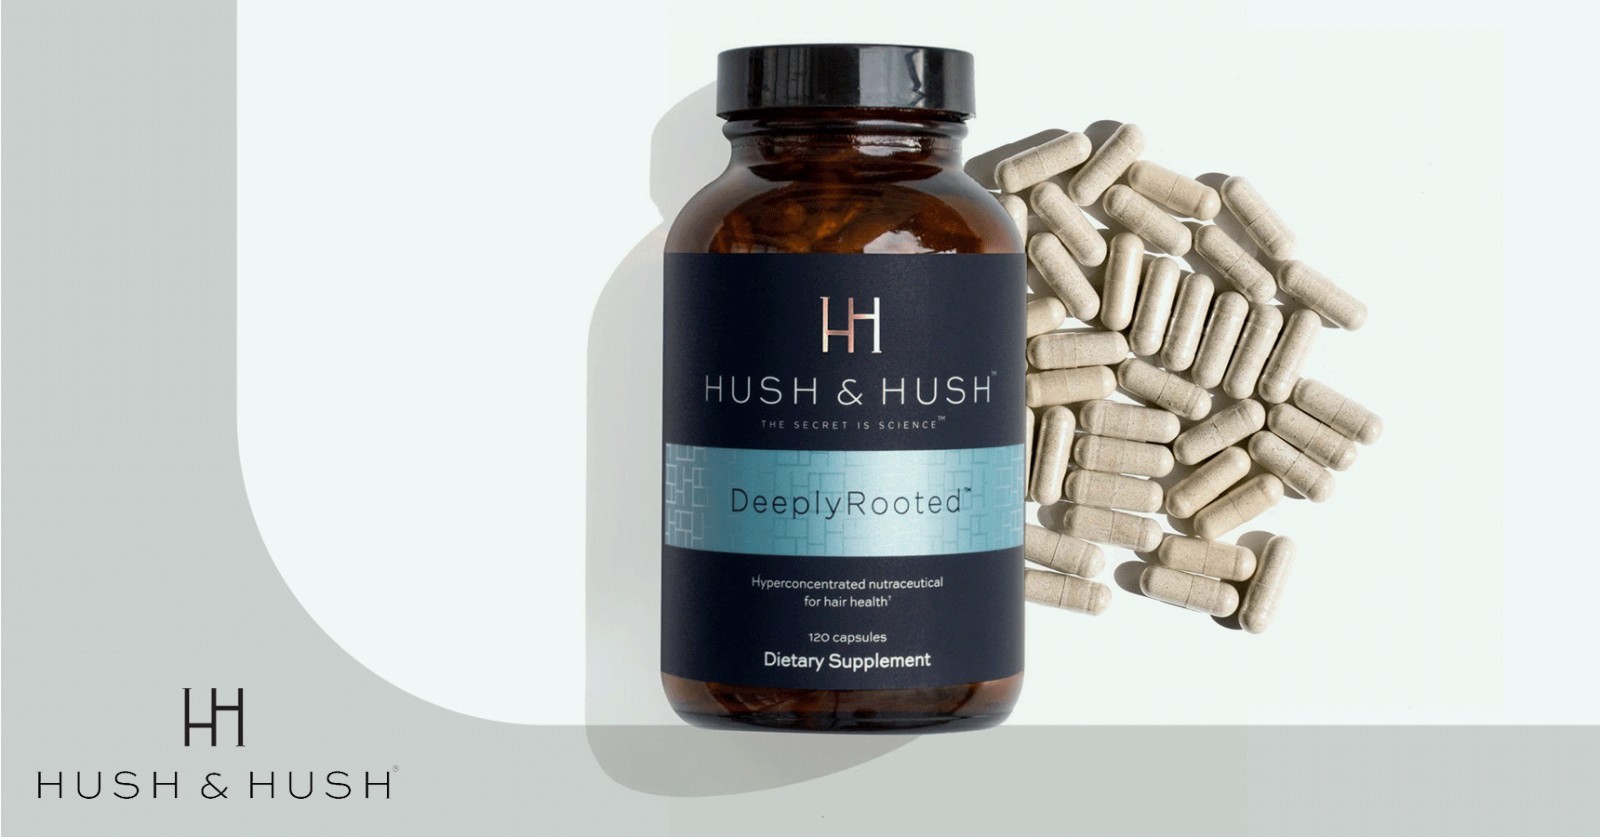 DeeplyRooted by Hush & Hush. A hair health supplement with vitamins, minerals, botanicals, and patented ingredients that nourish the scalp and support healthier-looking hair.